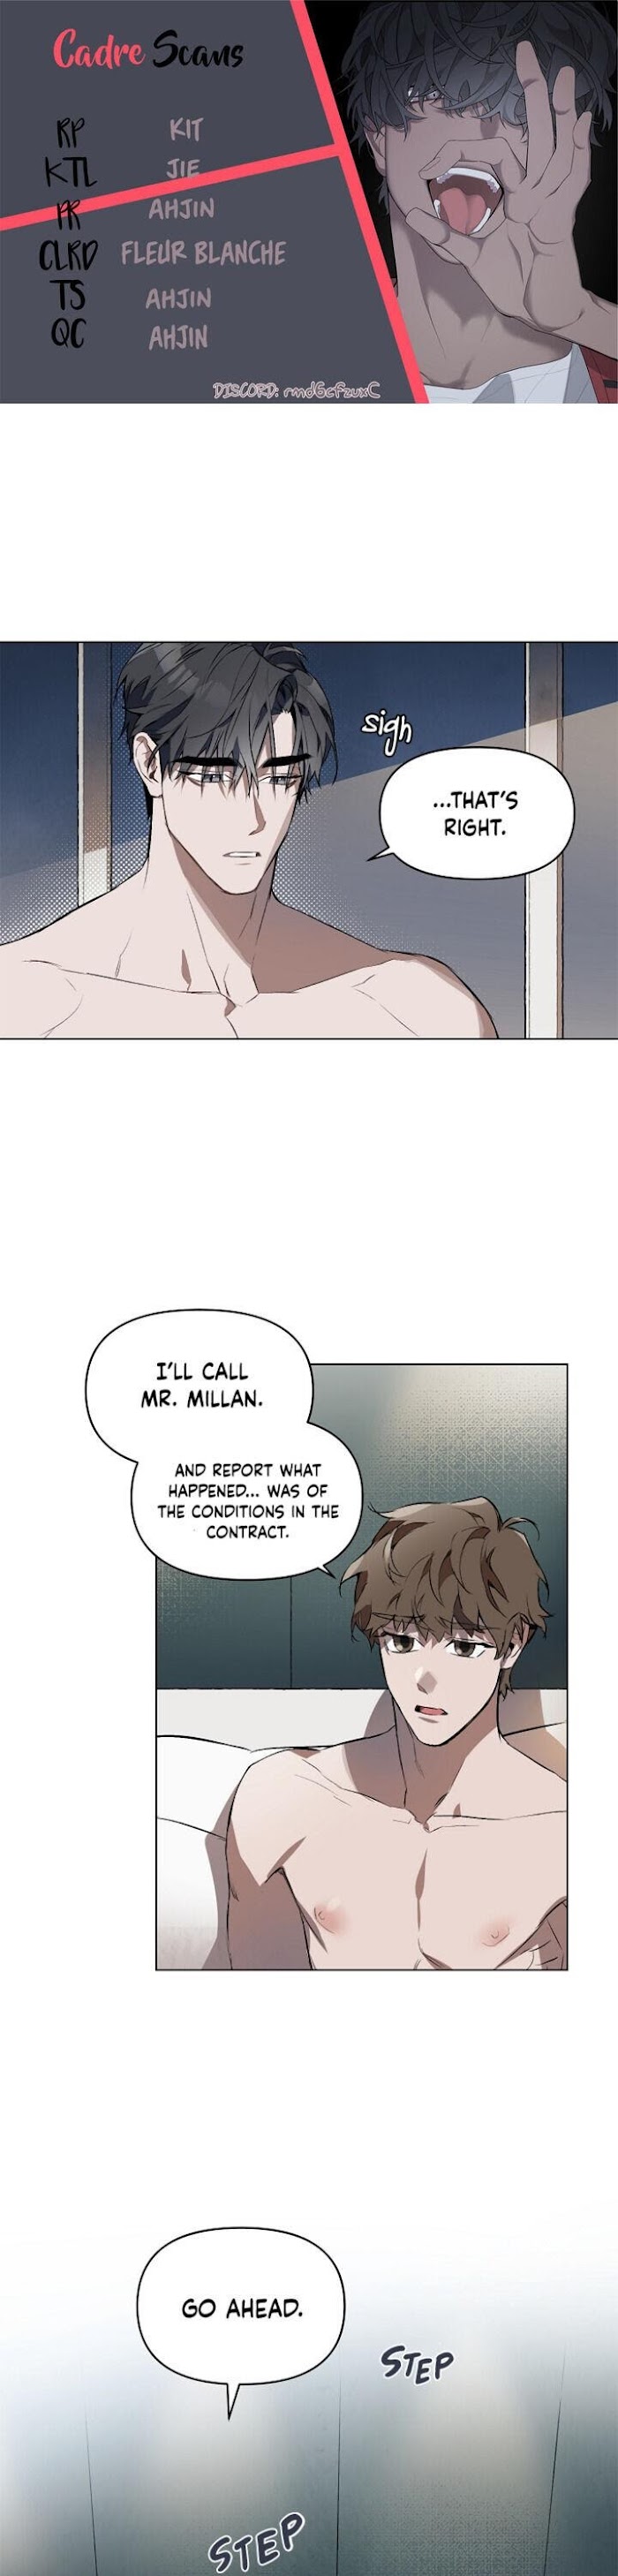 Define The Relationship (Yaoi) - Page 1